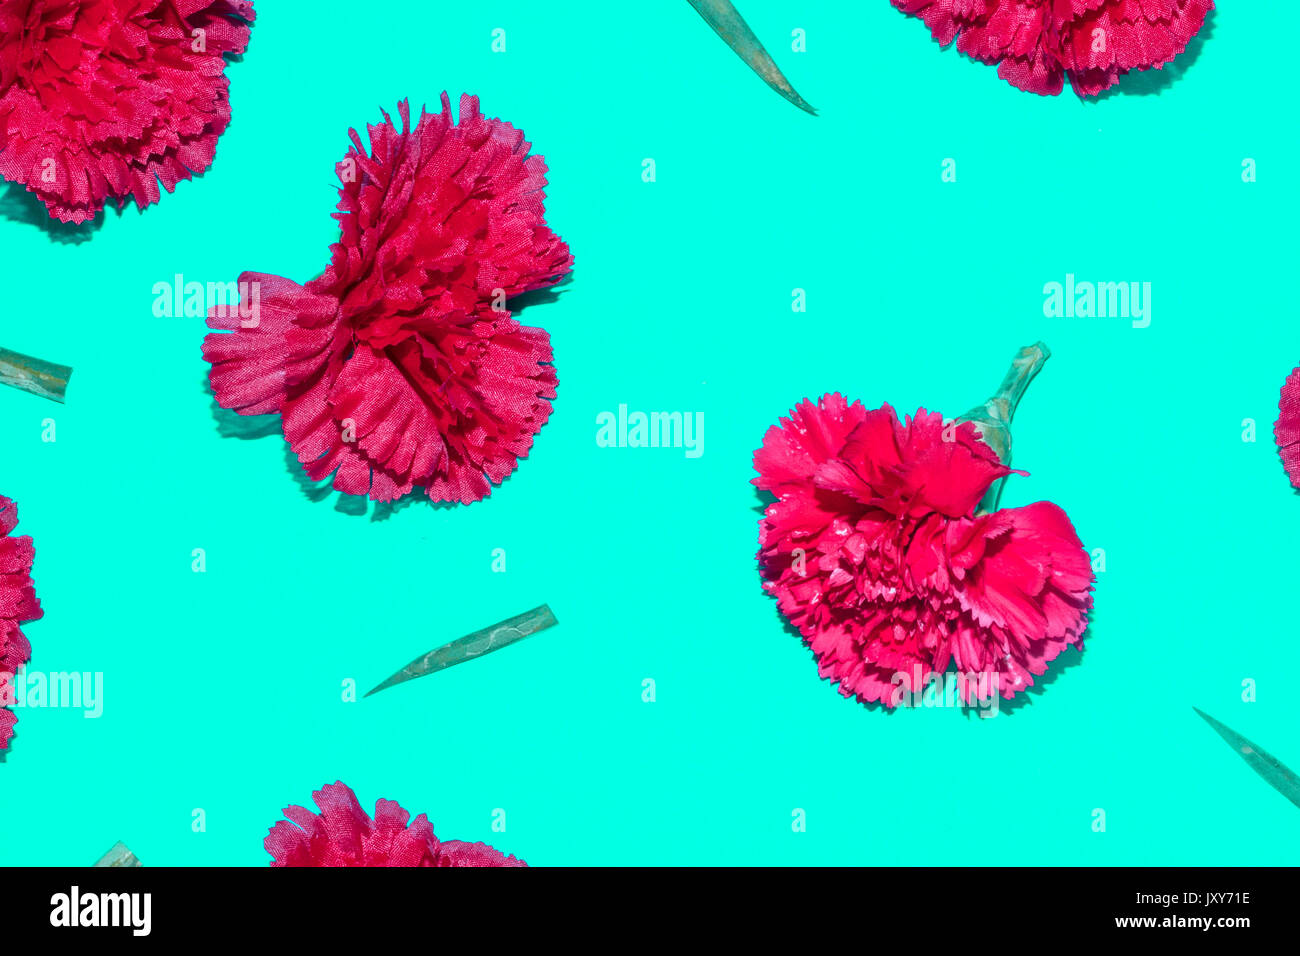 Fake and real red carnation flowers on blue background Stock Photo